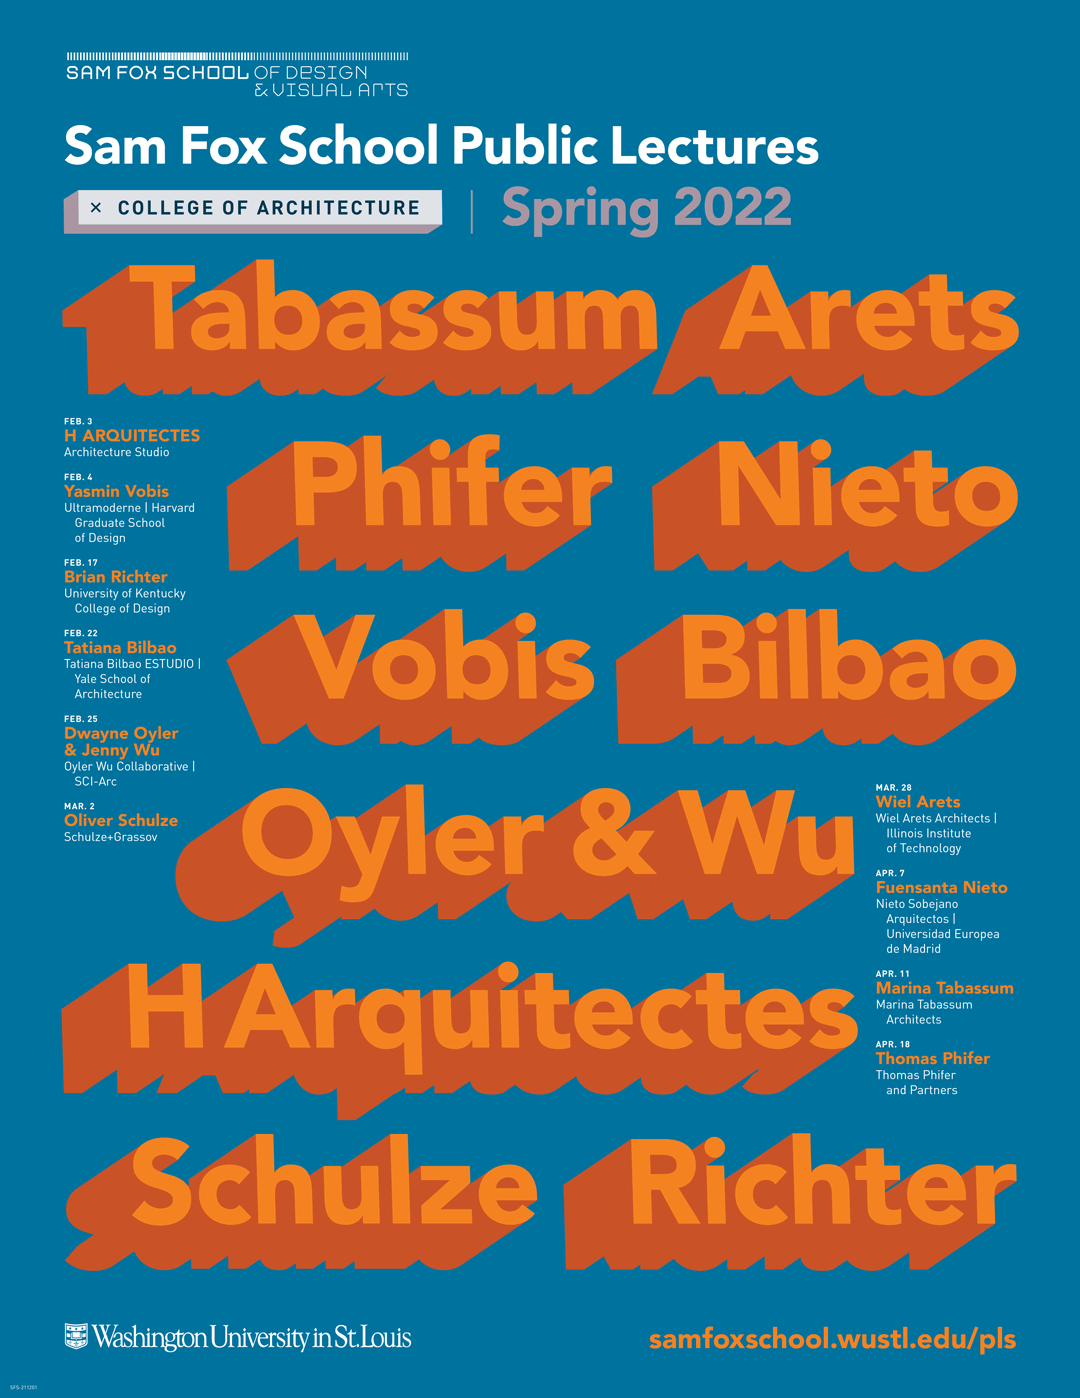 Lecture poster courtesy of Sam Fox School of Design & Visual Arts at Washington University in St. Louis